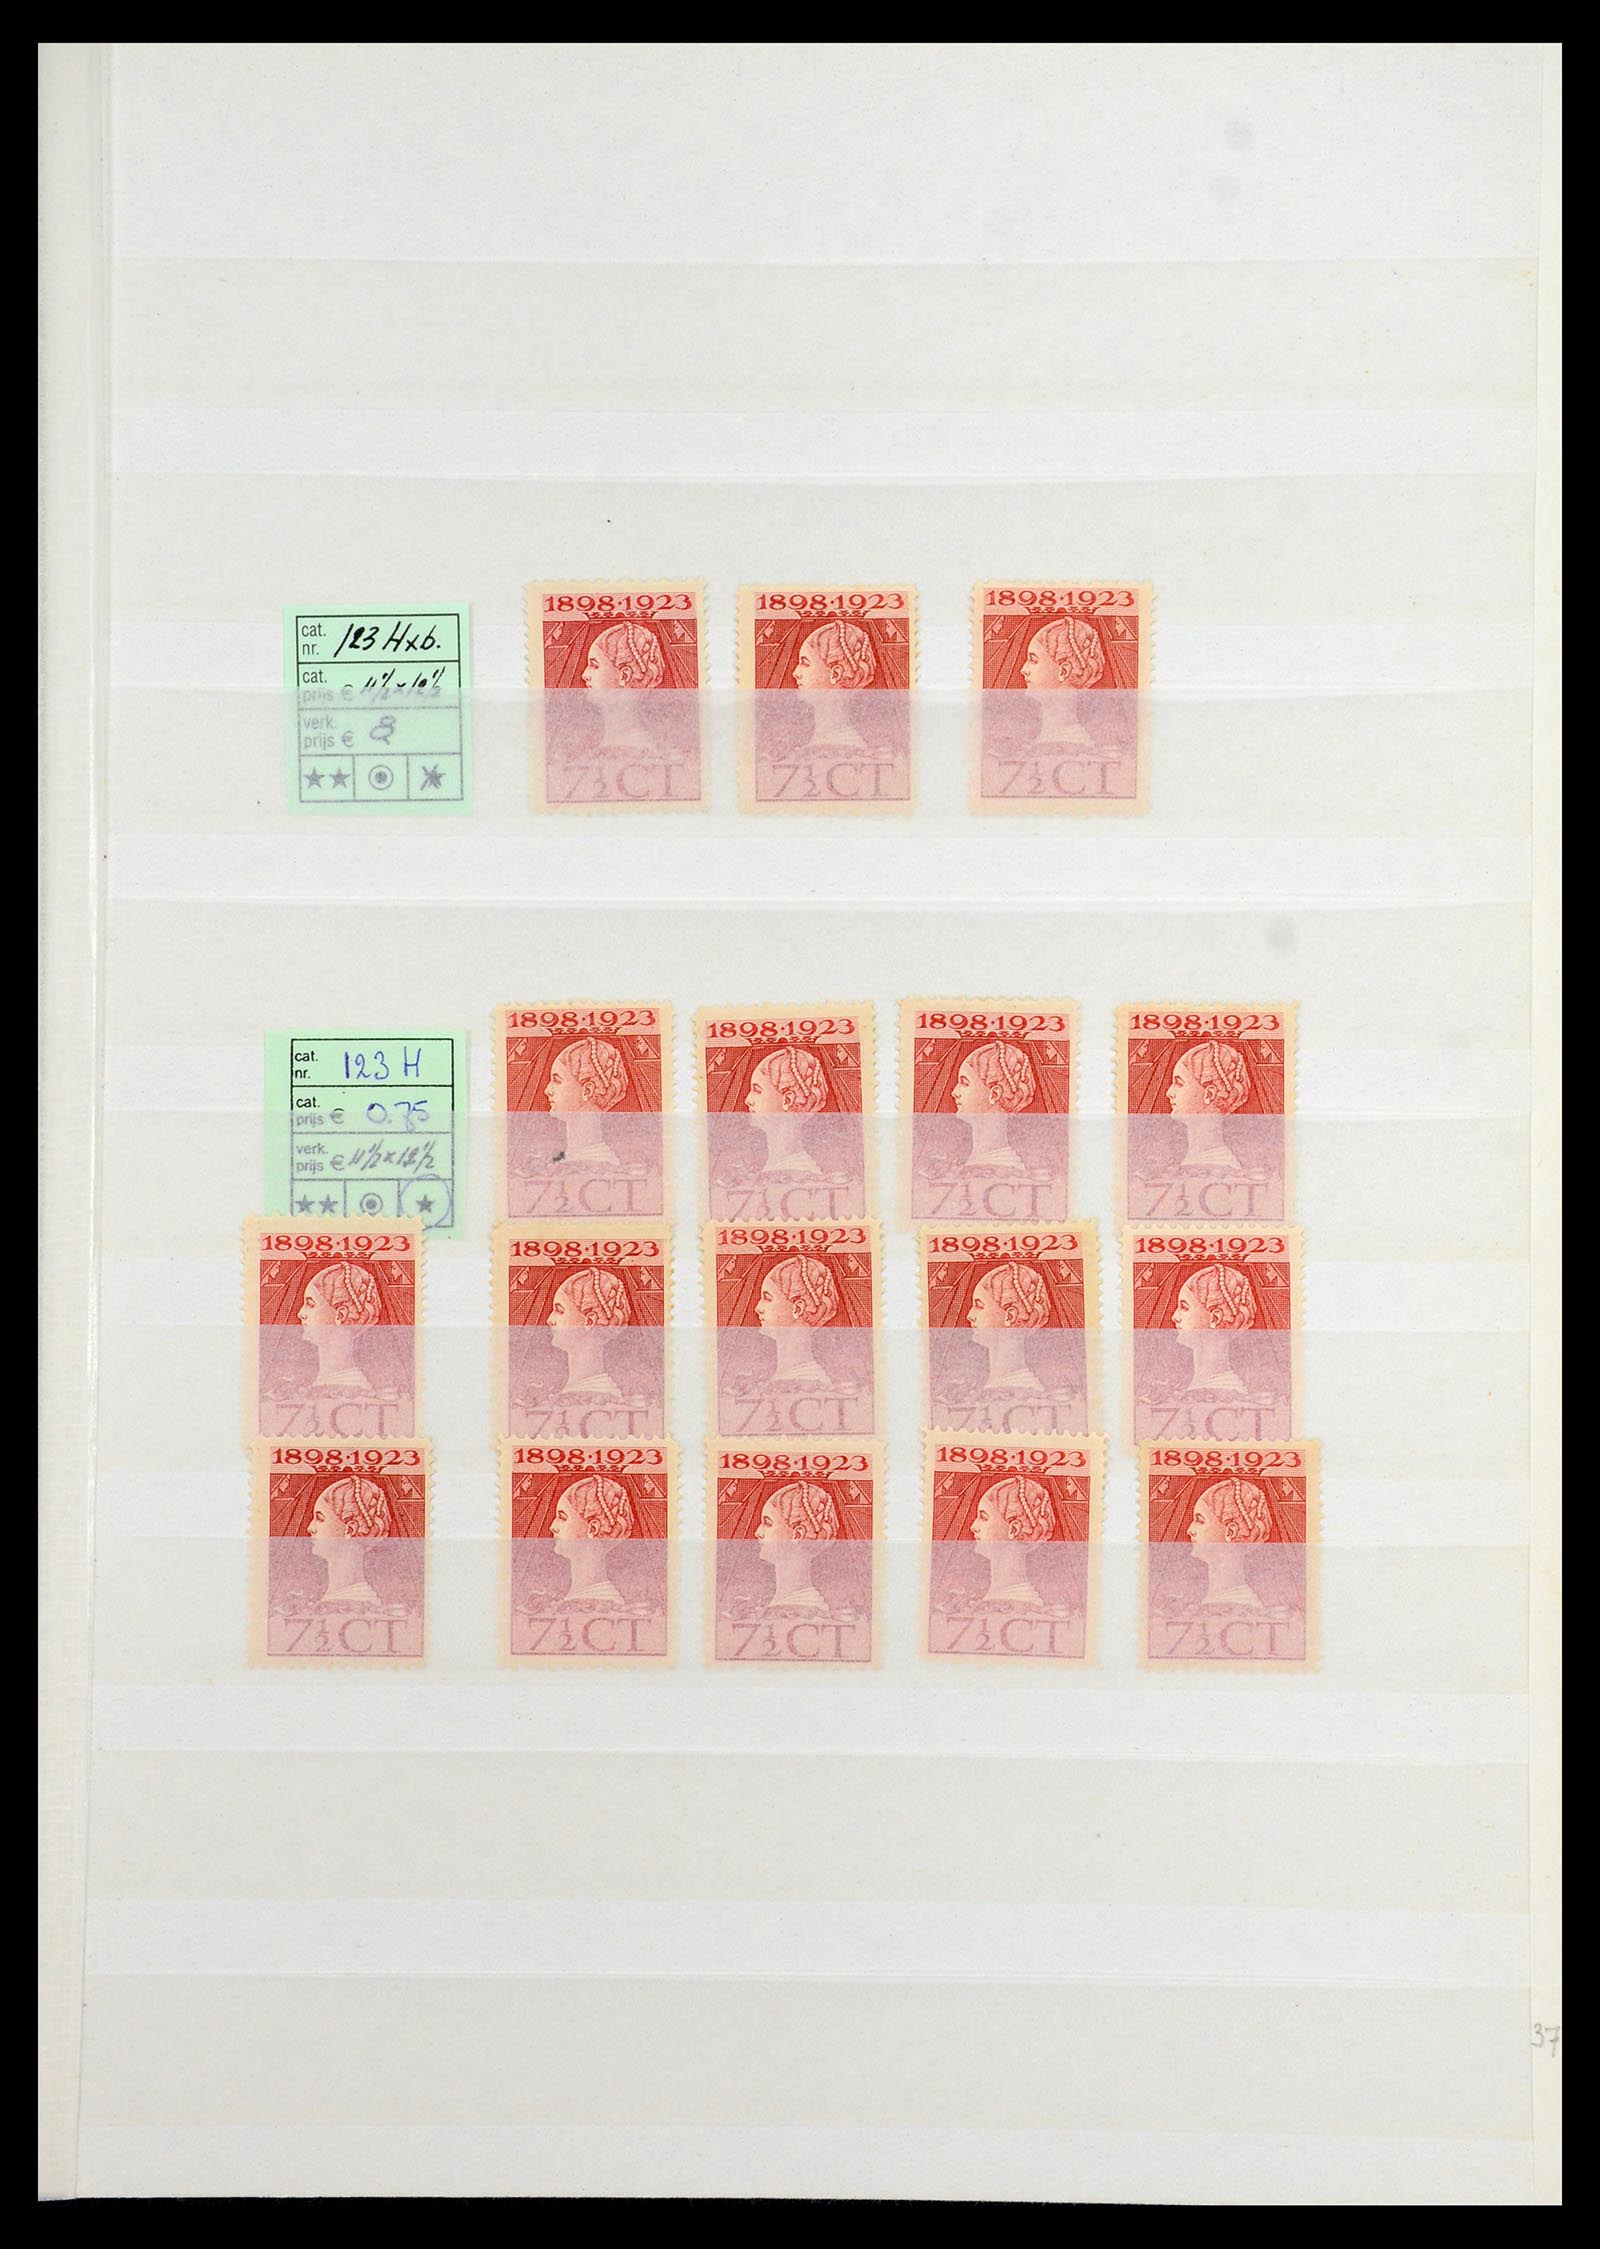 35895 028 - Stamp Collection 35895 Netherlands issue 1923.